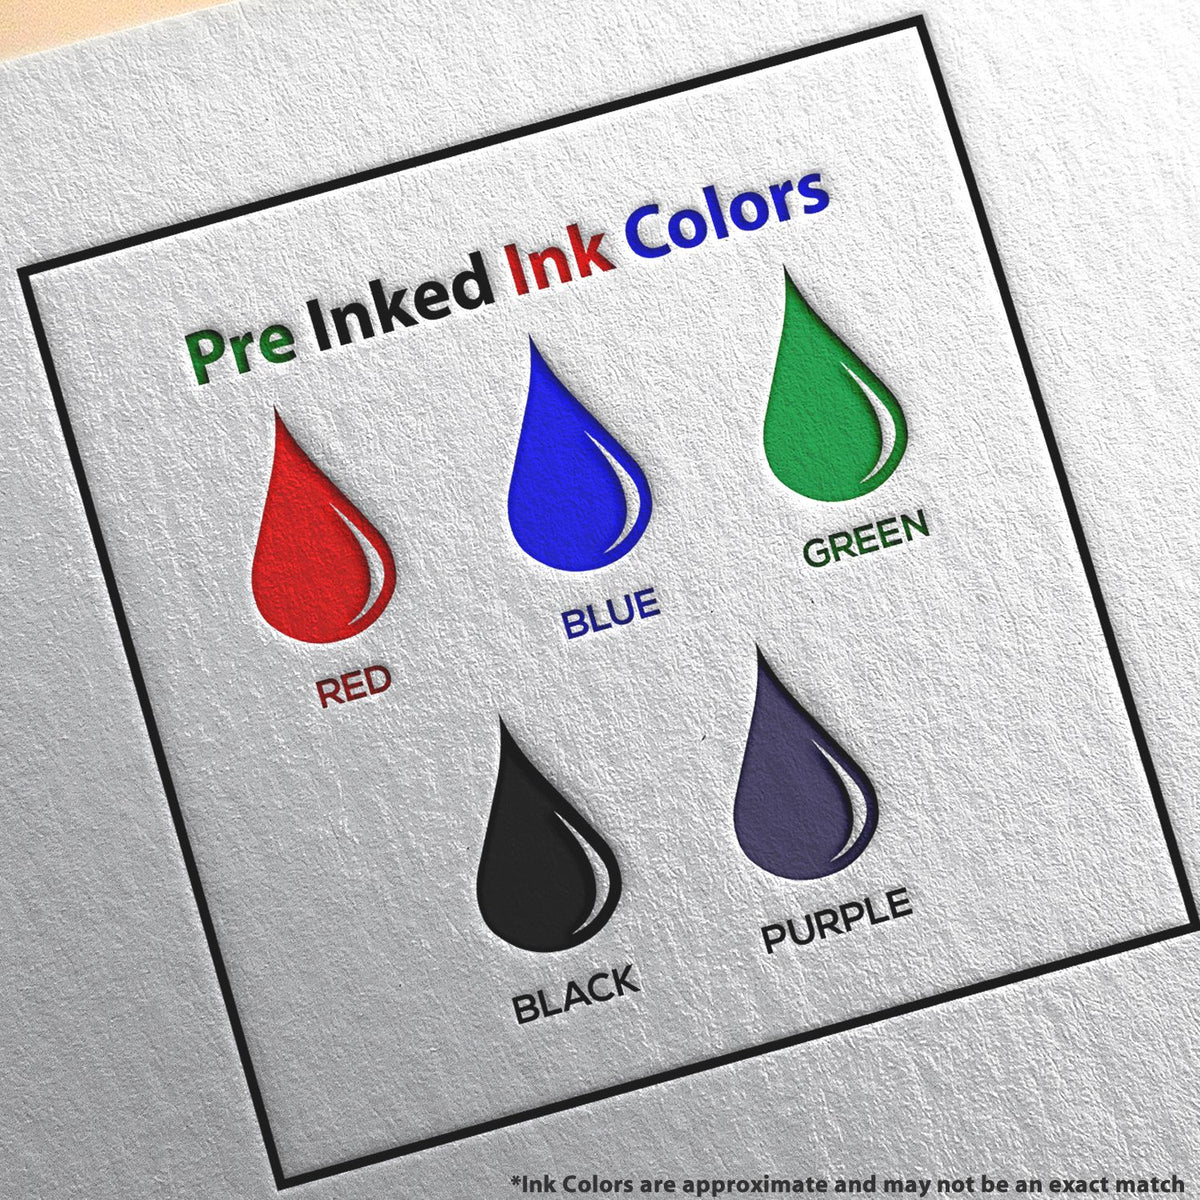 A picture showing the different ink colors or hues available for the Premium MaxLight Pre-Inked West Virginia Geology Stamp